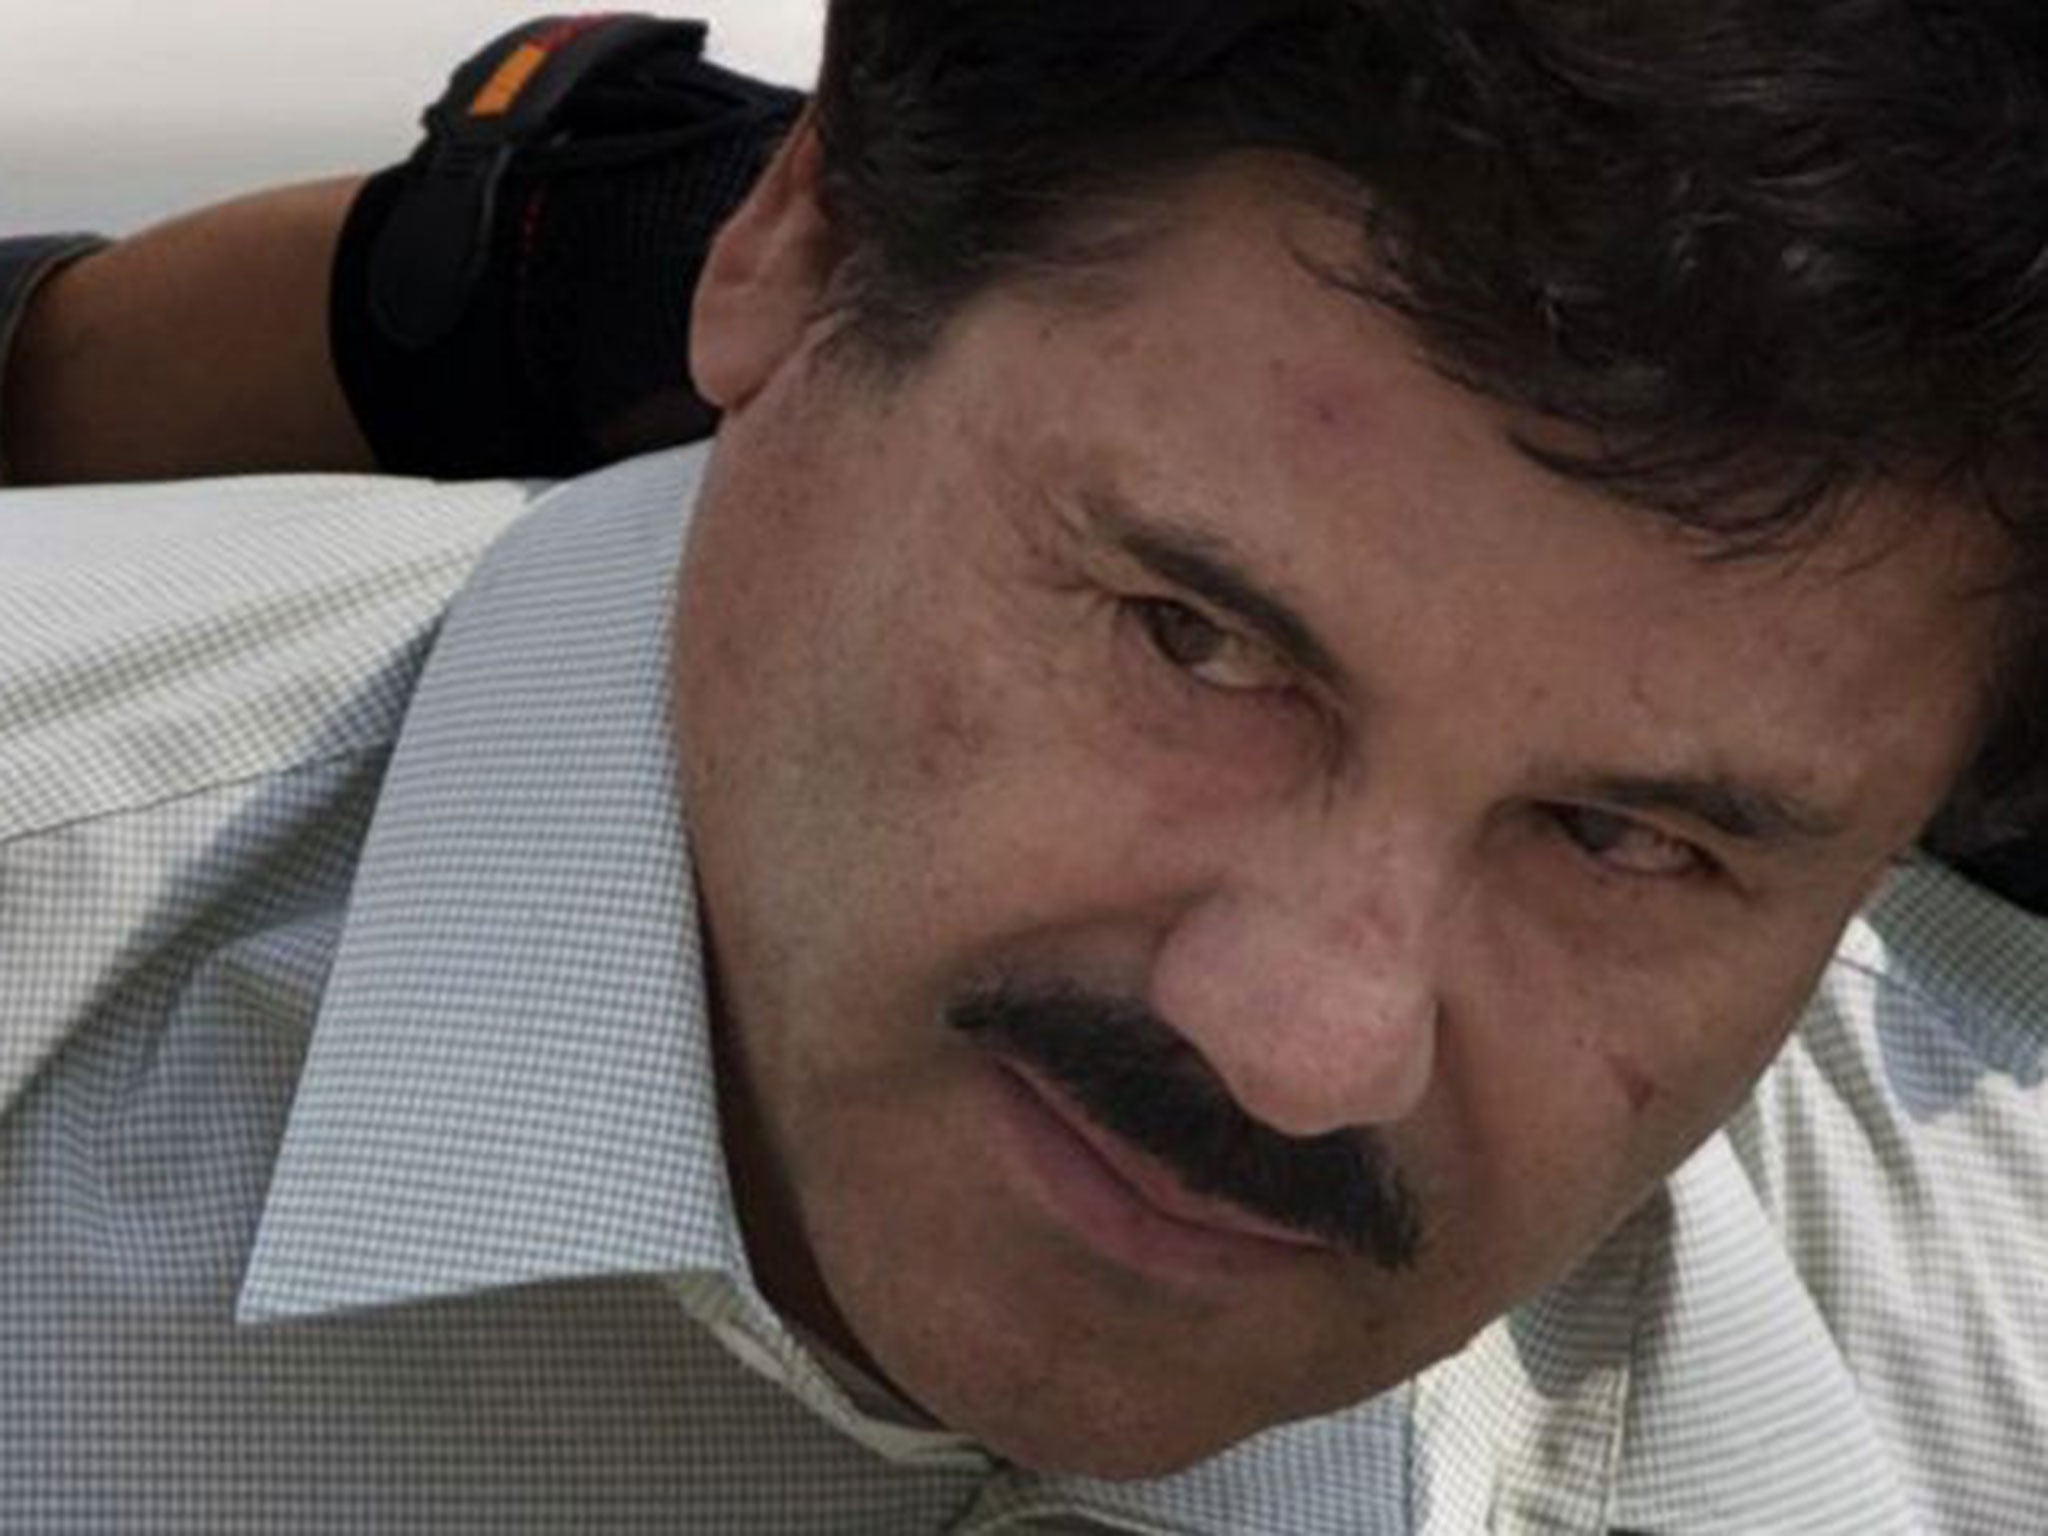 A judge in Mexico issued on Thursday, 30 July, 2015, a provision warrant to detain Guzman based on an extradition request from the United States